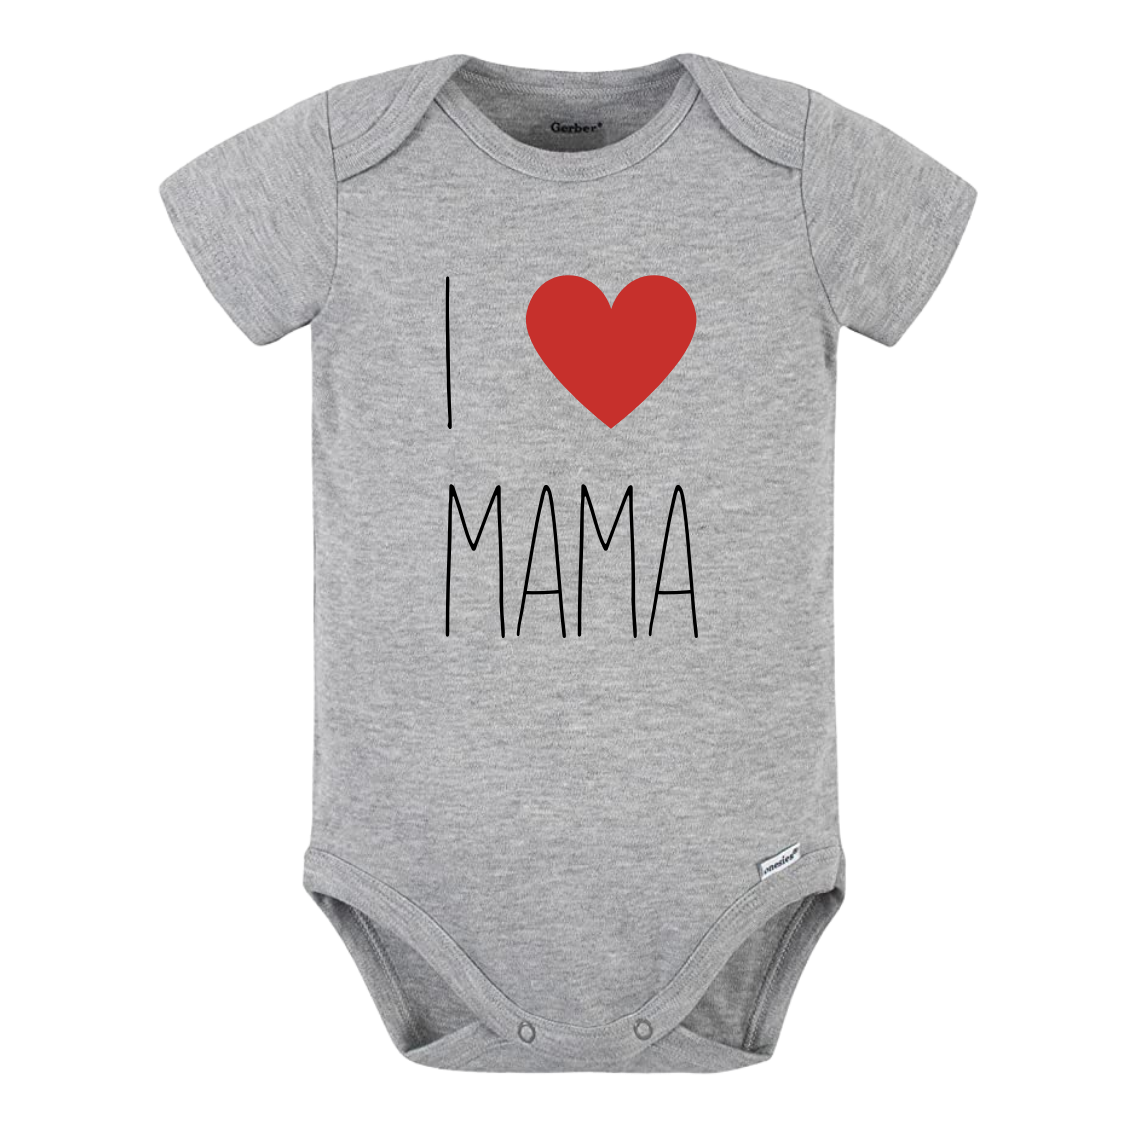 Baby Onesie® I Love Mama Baby Infant Clothing for Baby Shower Gift